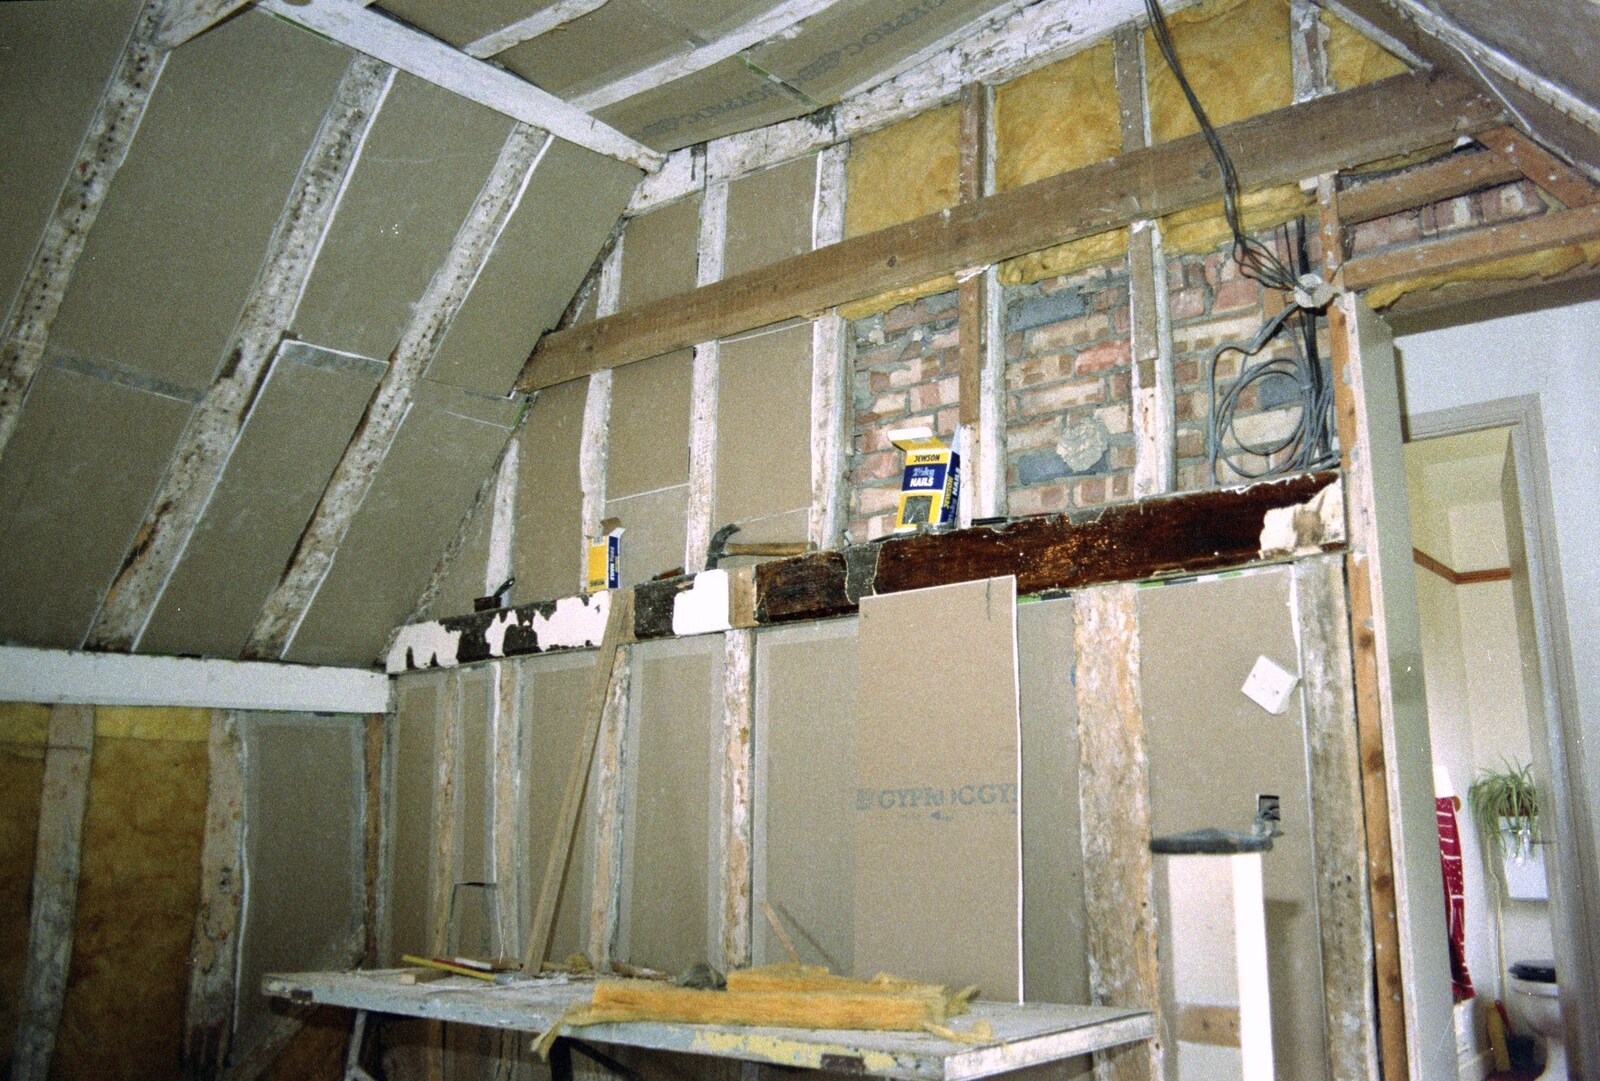 The timbers are boarded up again from Hale-Bopp and Bedroom Demolition, Brome, Suffolk - 10th May 1997